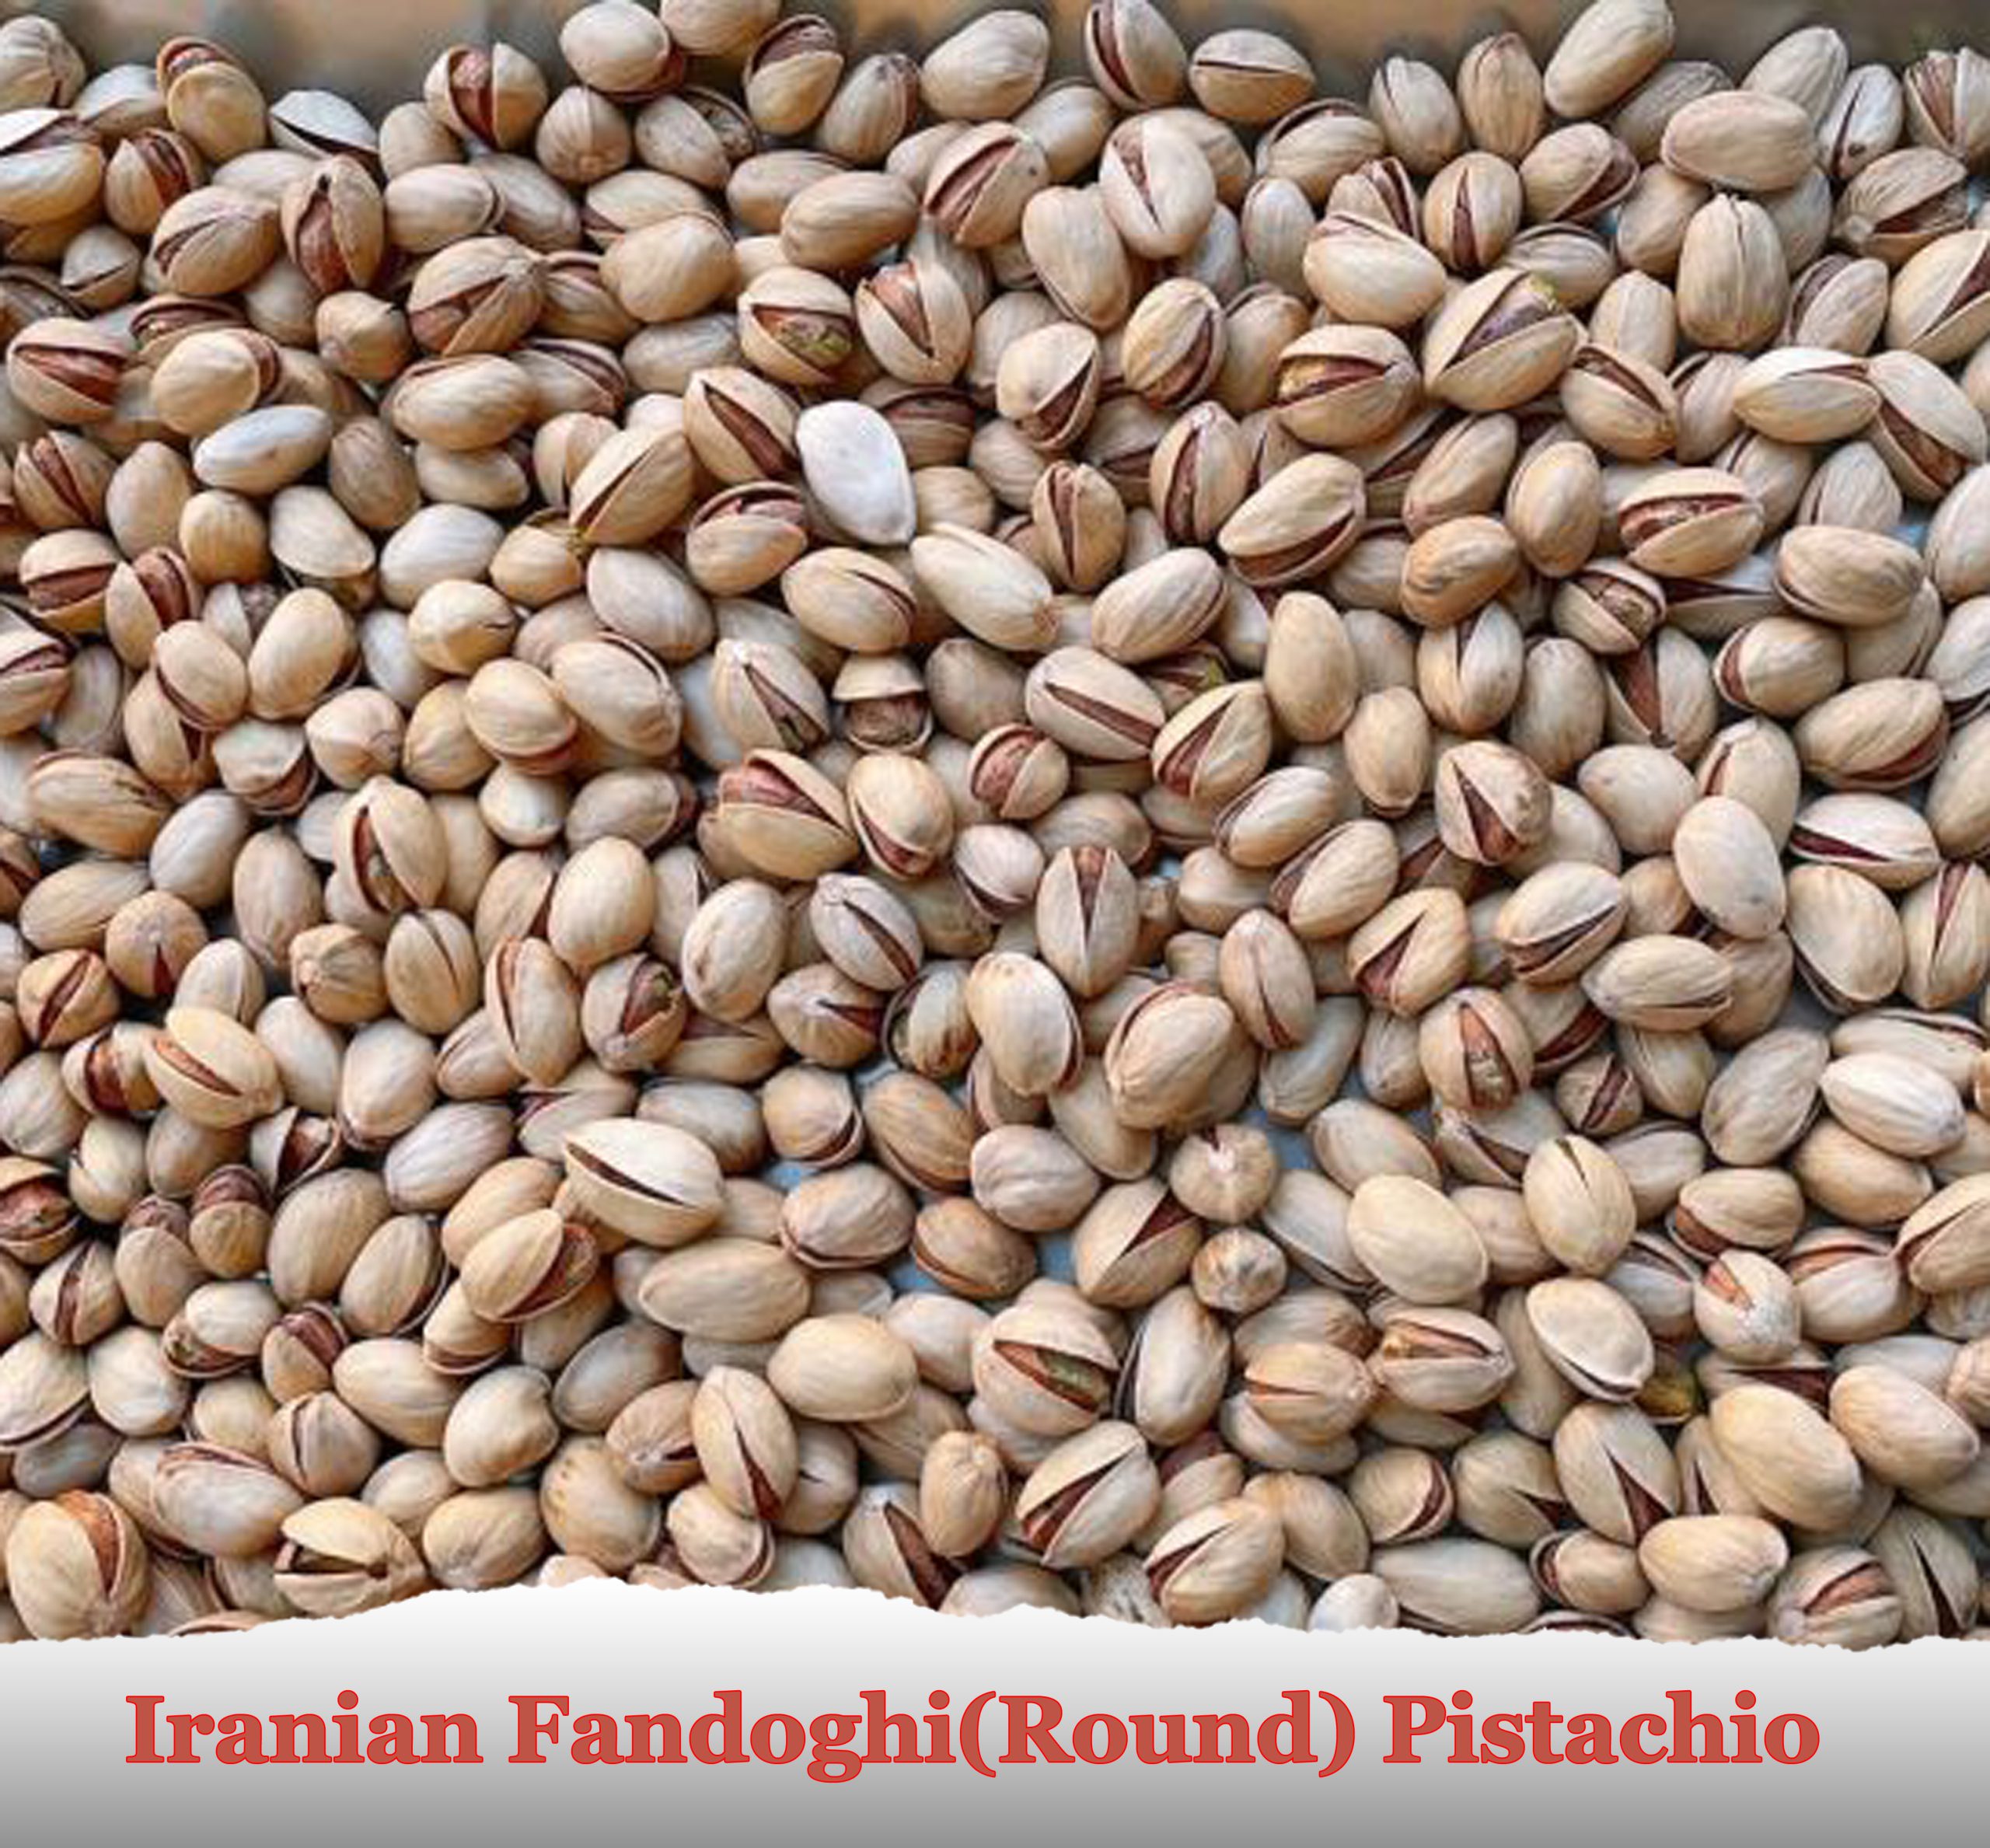 Nutex Dried Fruit Group as an Exporter of Fandoghi Pistachios - The Largest Supplier of Fandighi Pistachios in Bulk - Nutex Nuts